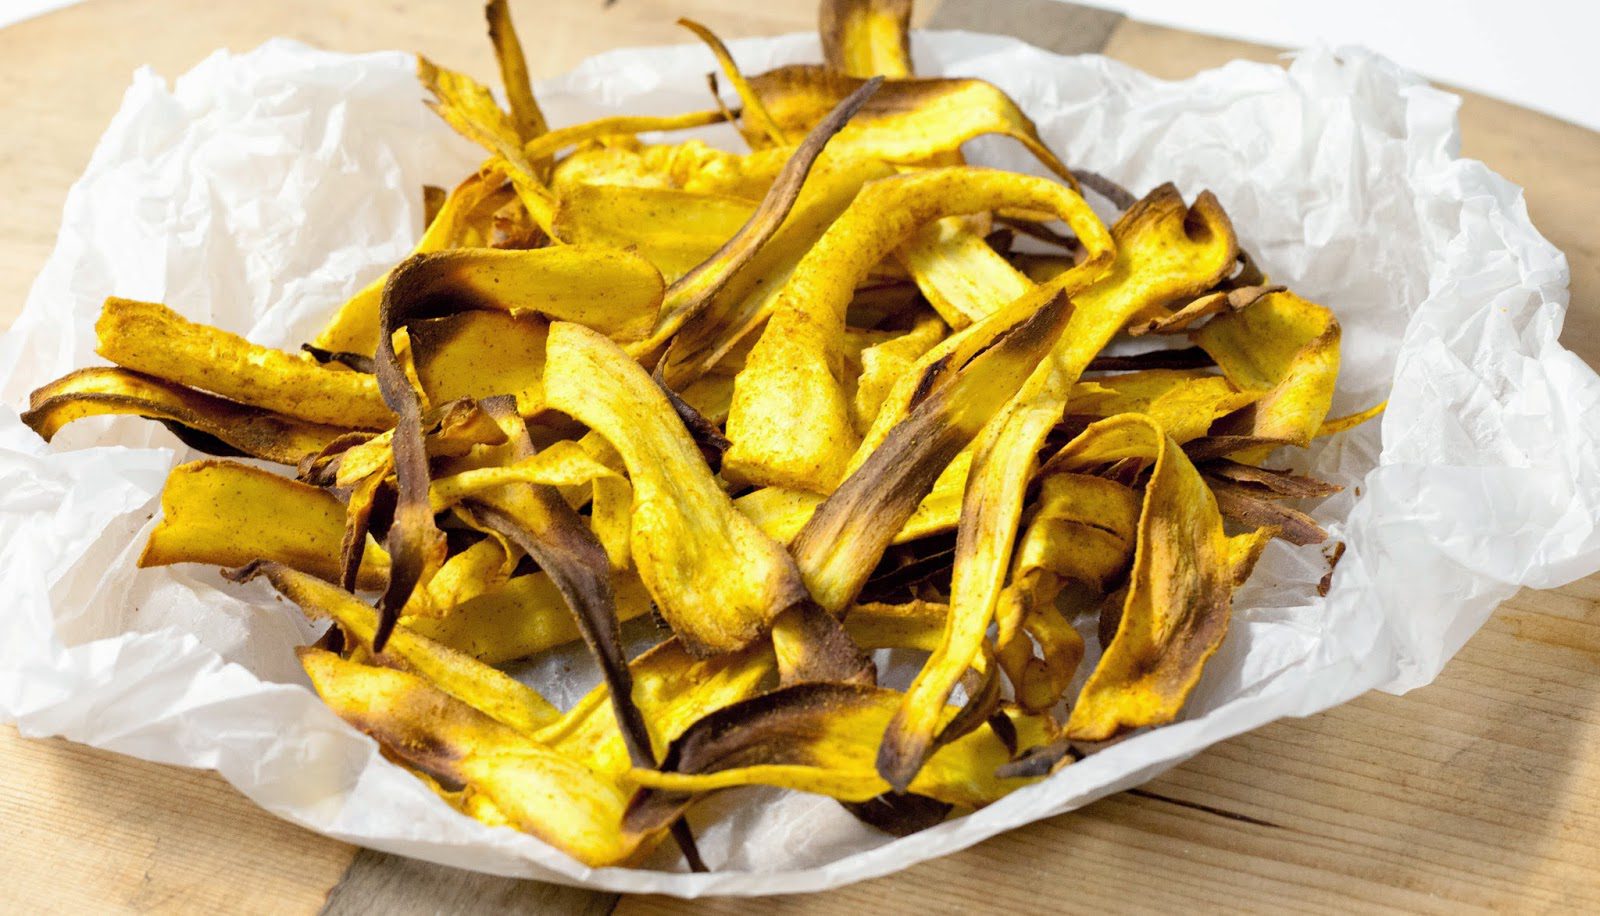 Turmeric Spiced Parsnip Chips (Baked)